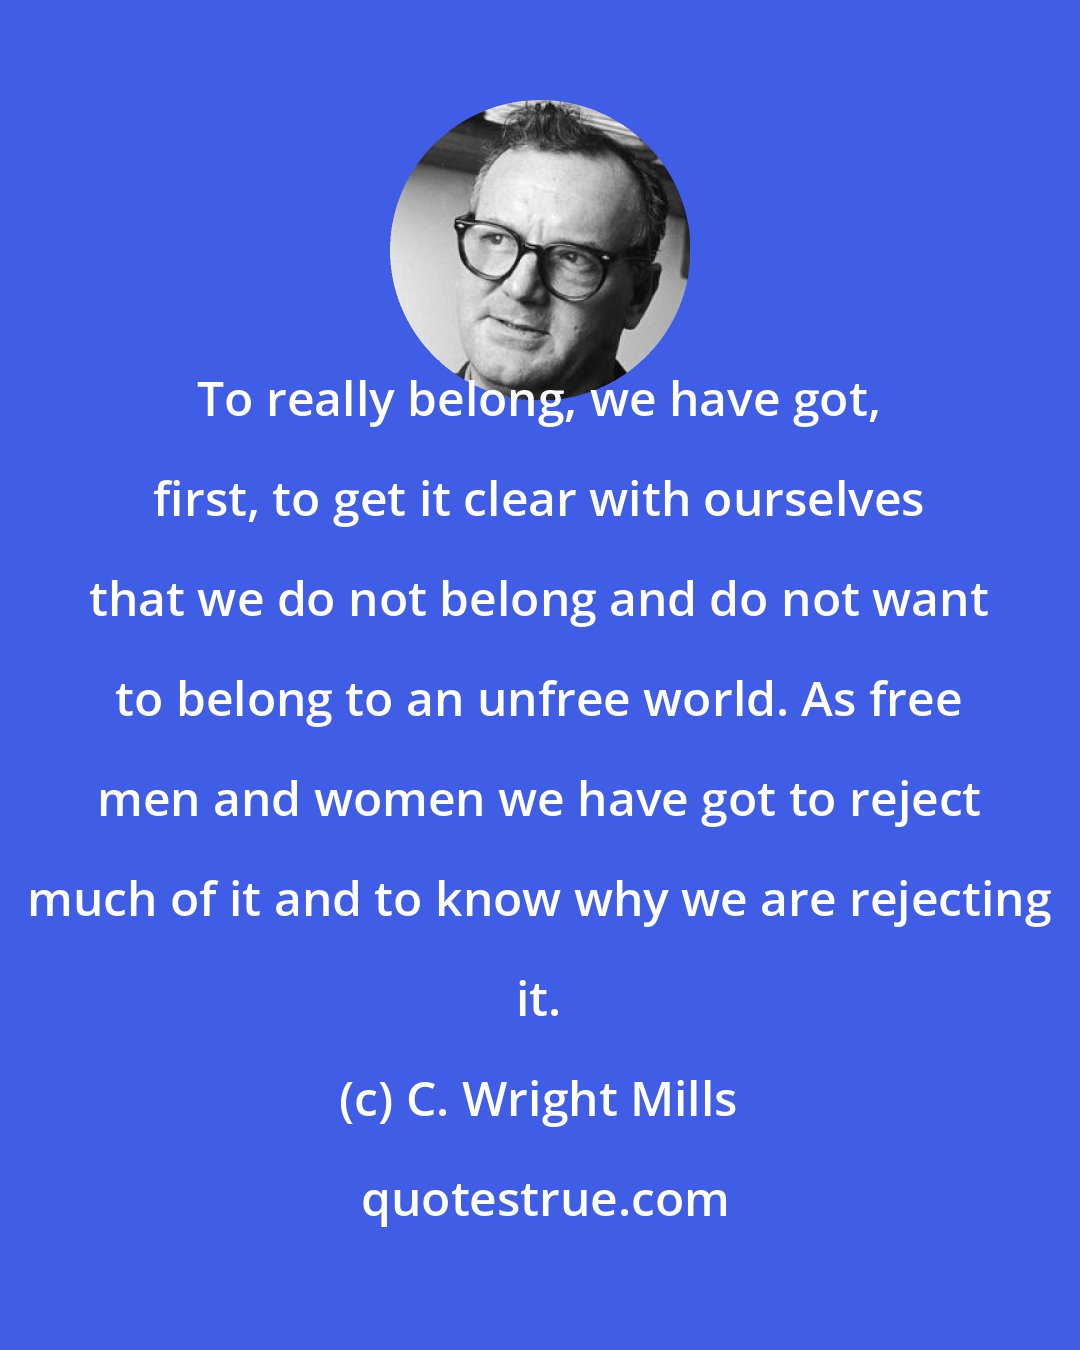 C. Wright Mills: To really belong, we have got, first, to get it clear with ourselves that we do not belong and do not want to belong to an unfree world. As free men and women we have got to reject much of it and to know why we are rejecting it.